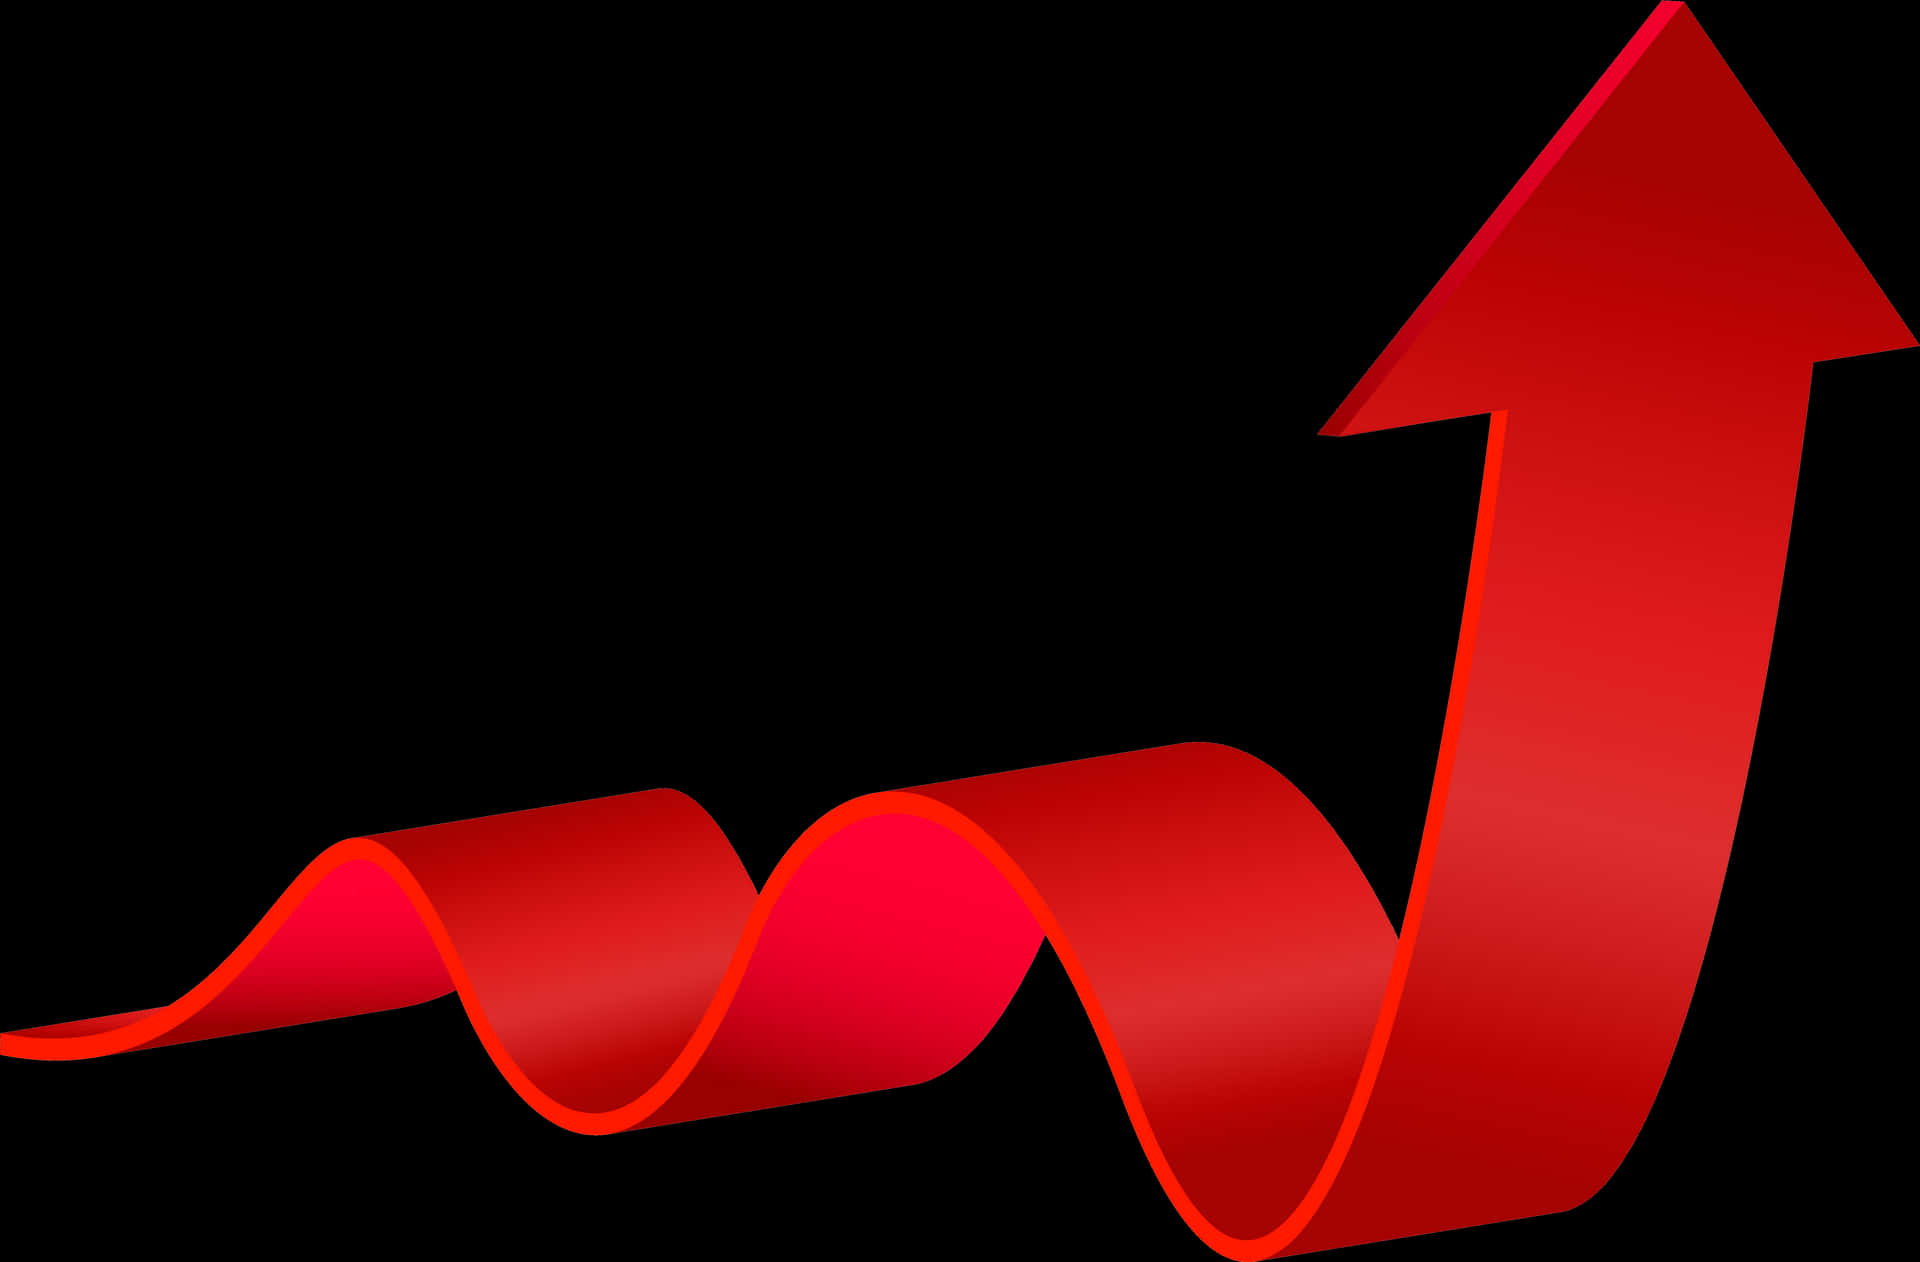 Red Curved Arrow Upward PNG